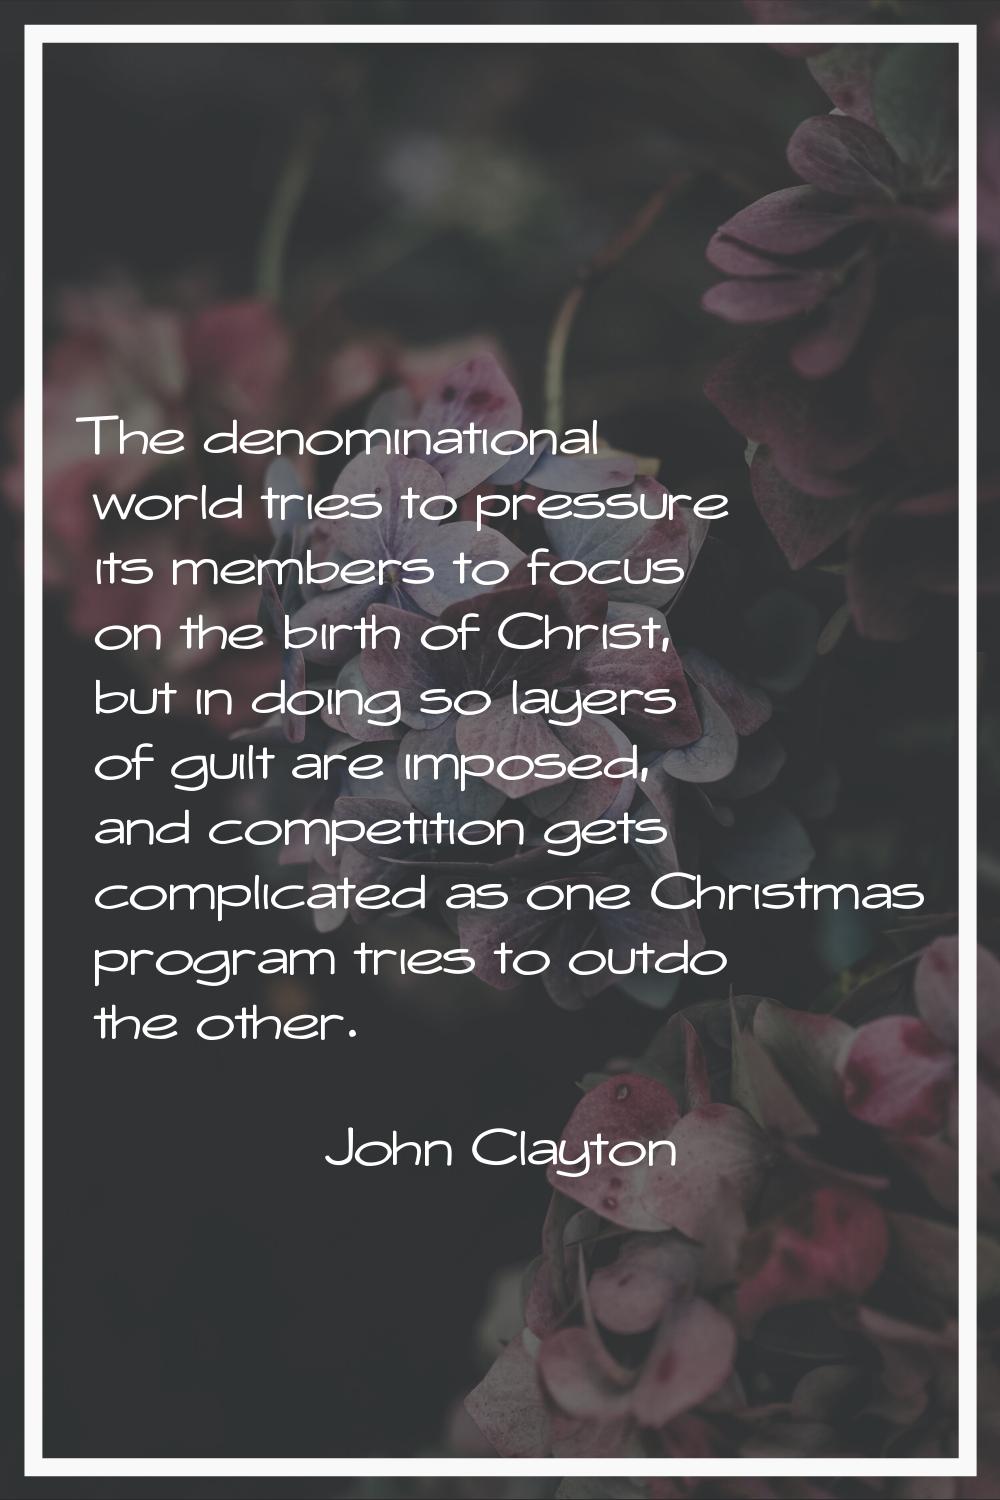 The denominational world tries to pressure its members to focus on the birth of Christ, but in doin